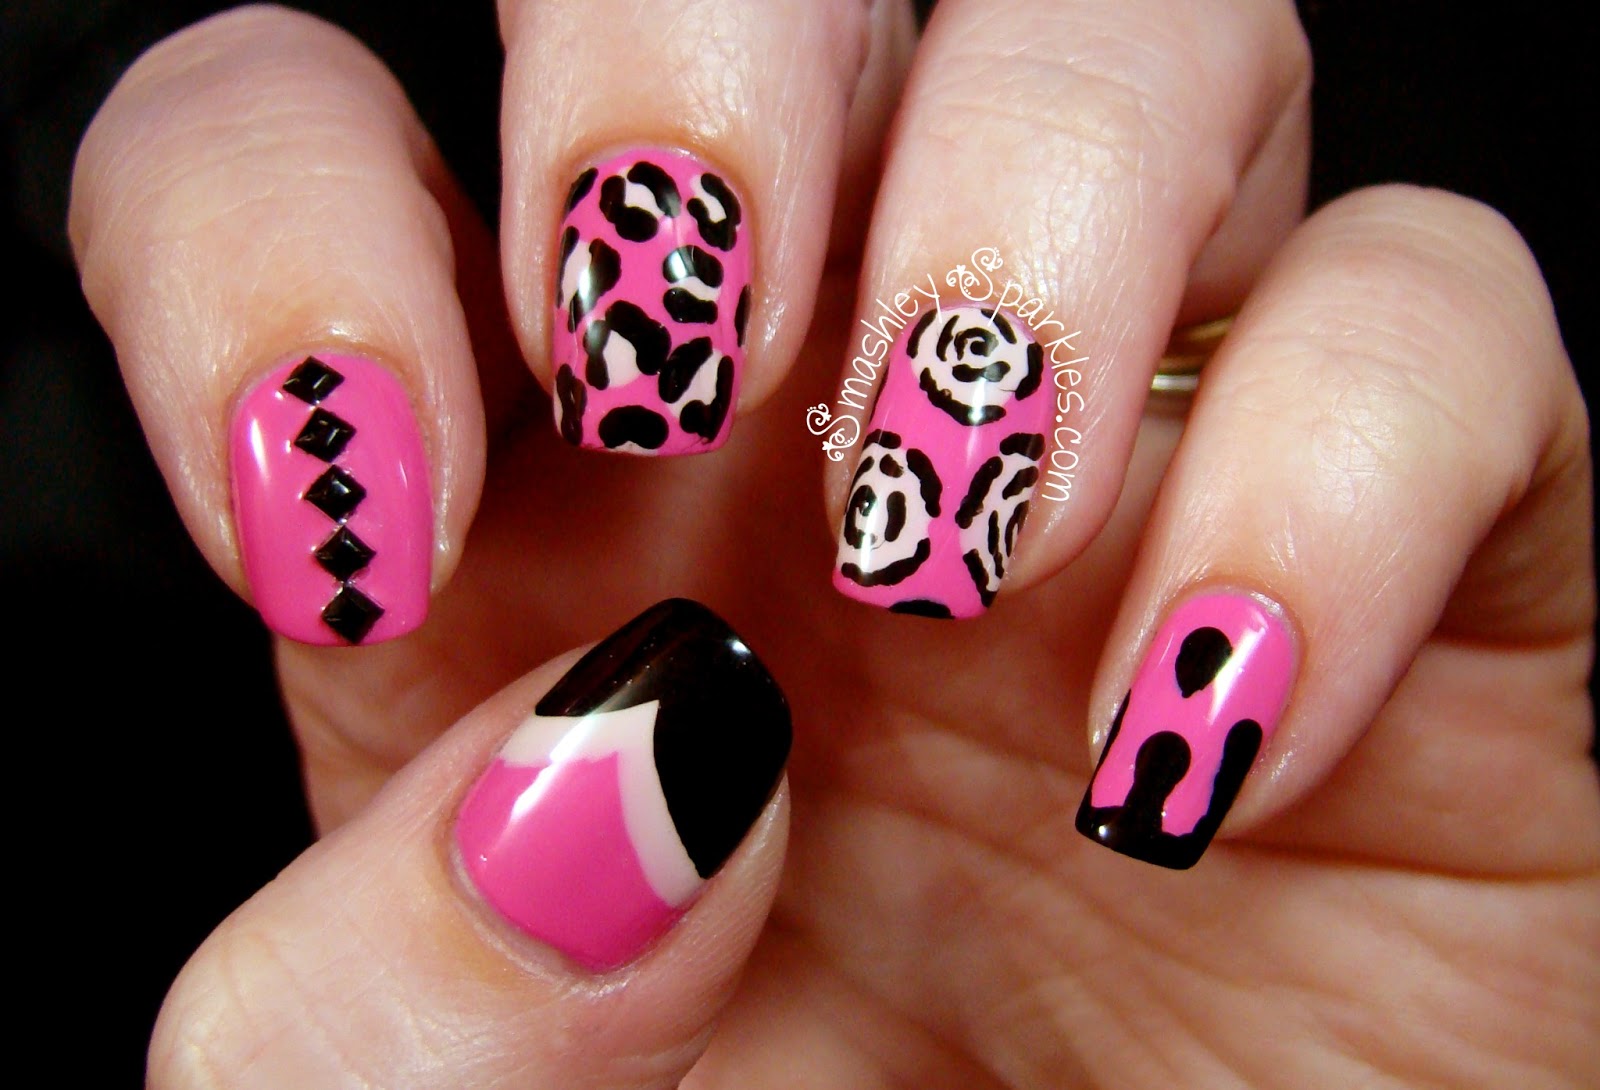 2. Bold Black, White, and Hot Pink Nail Art - wide 7